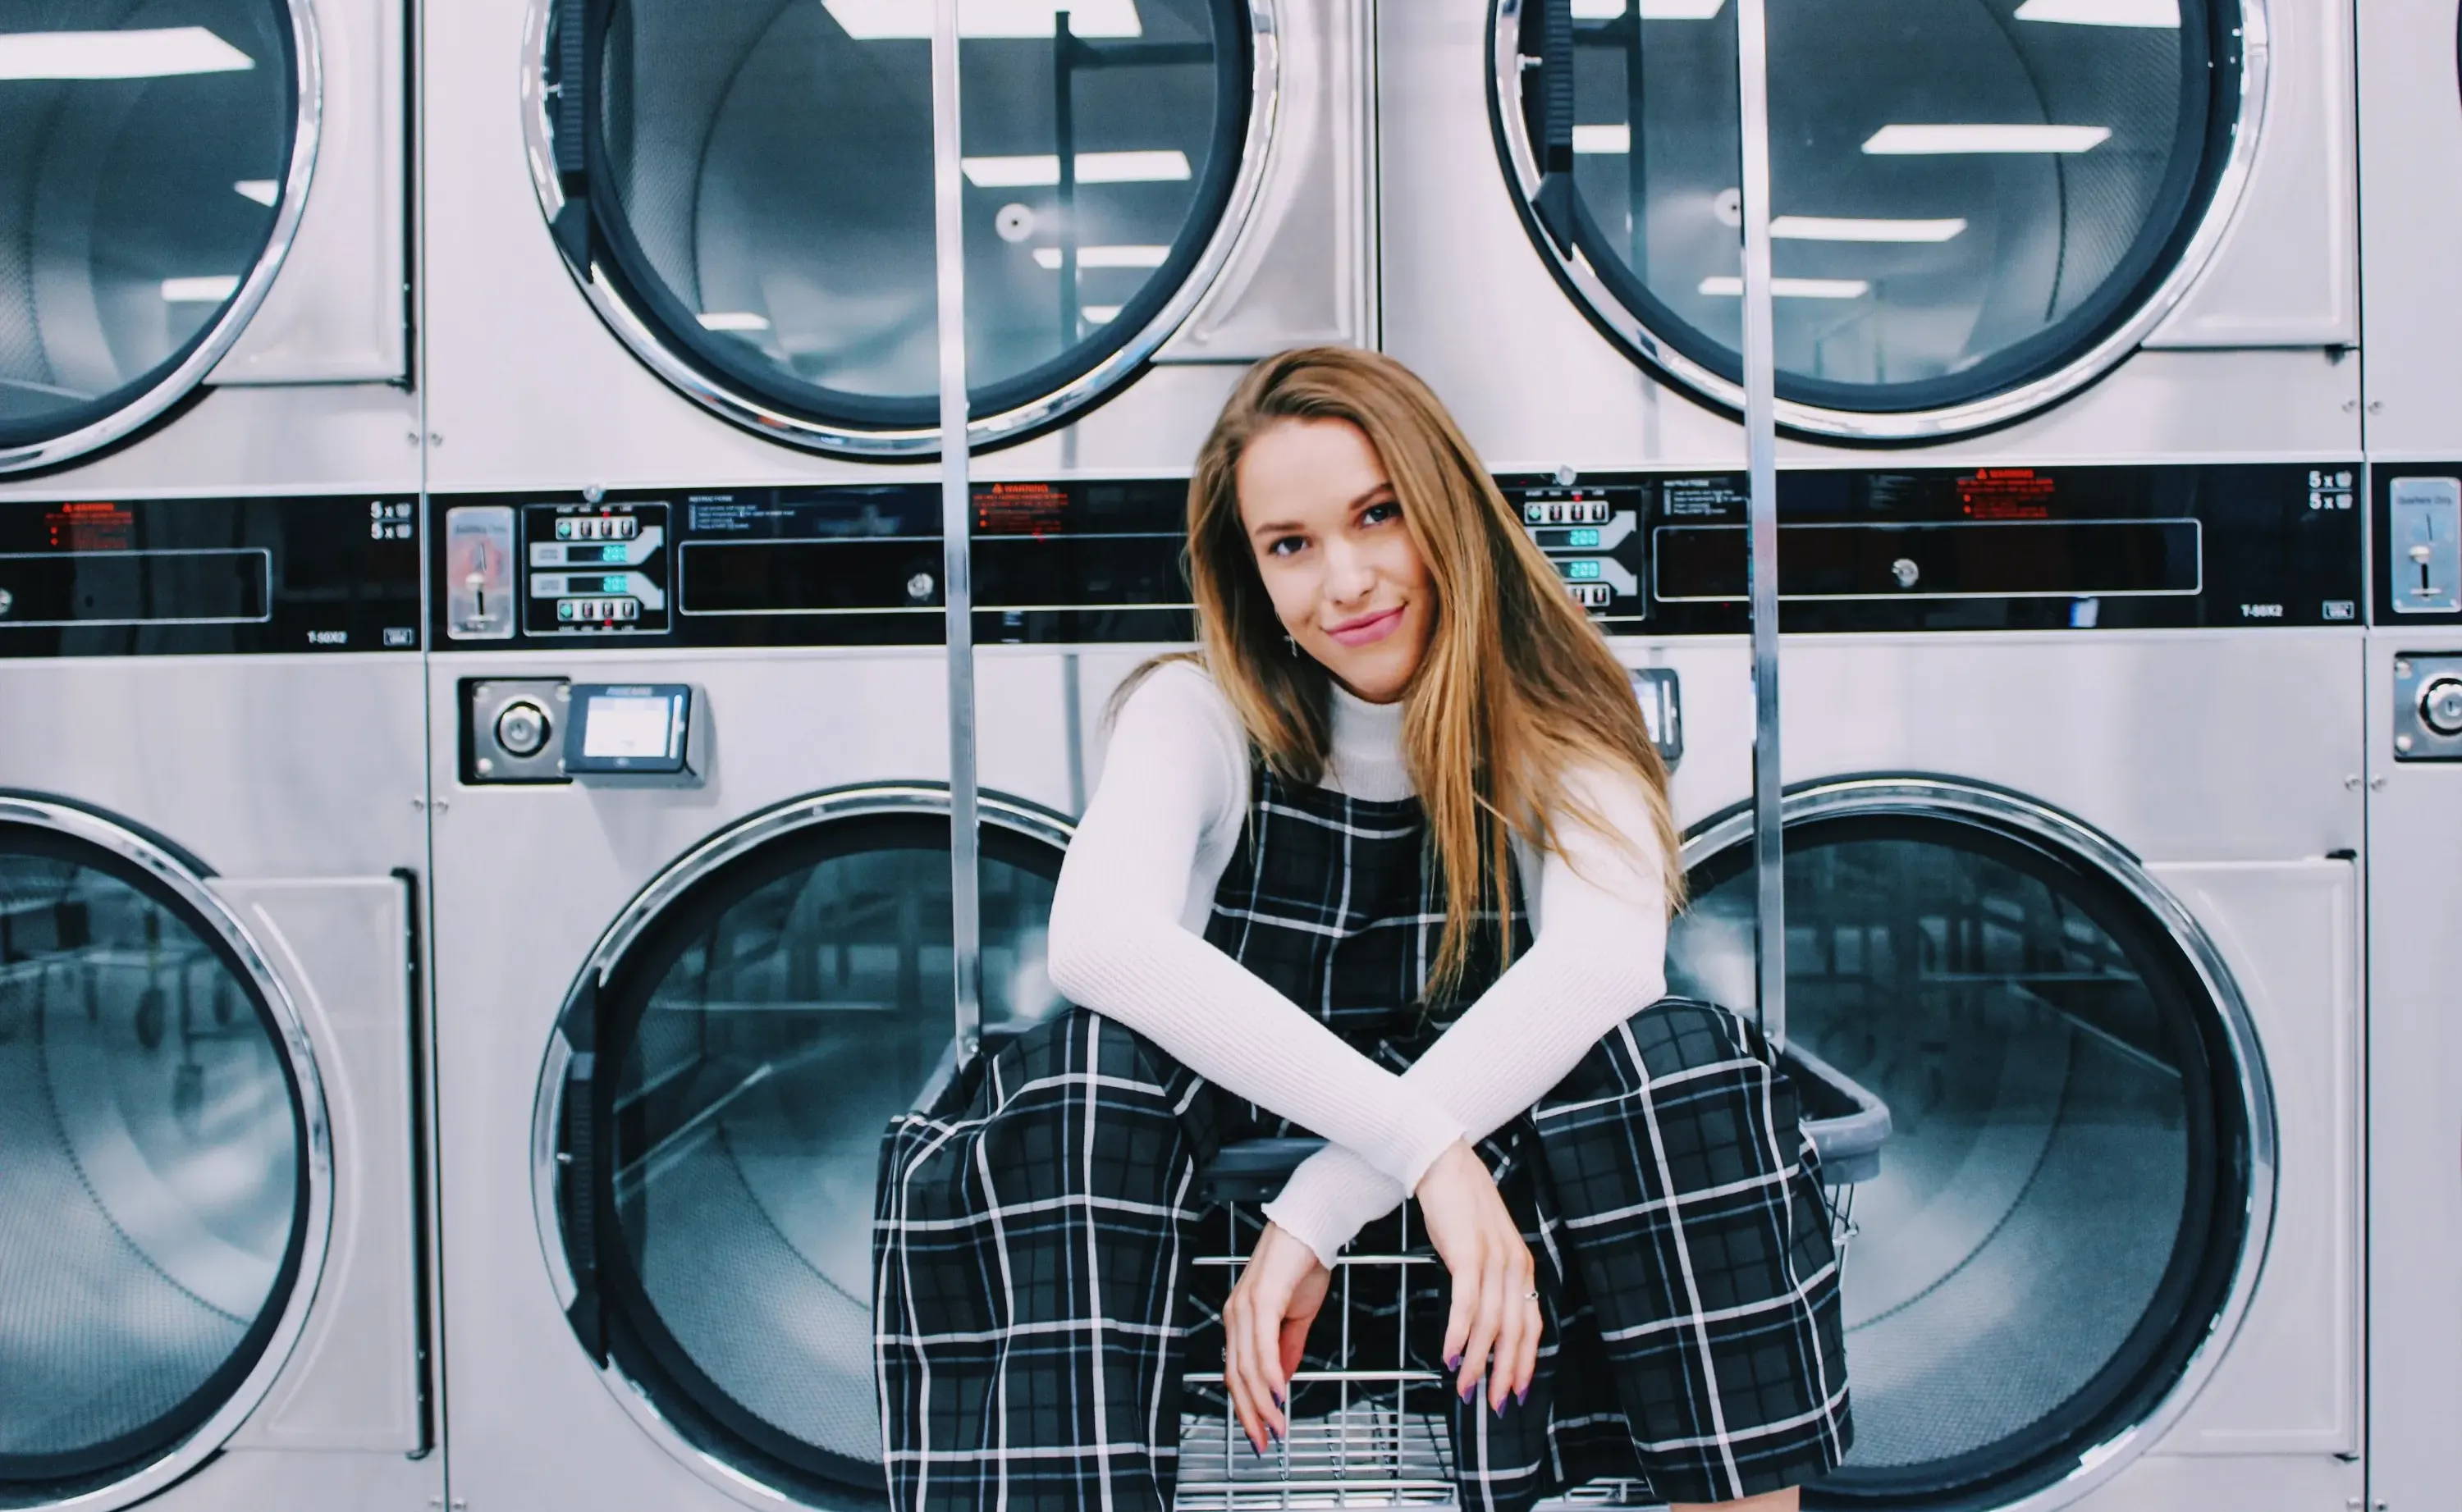 A woman in plaid overalls sits and smiles in front of laundromat washing machines.